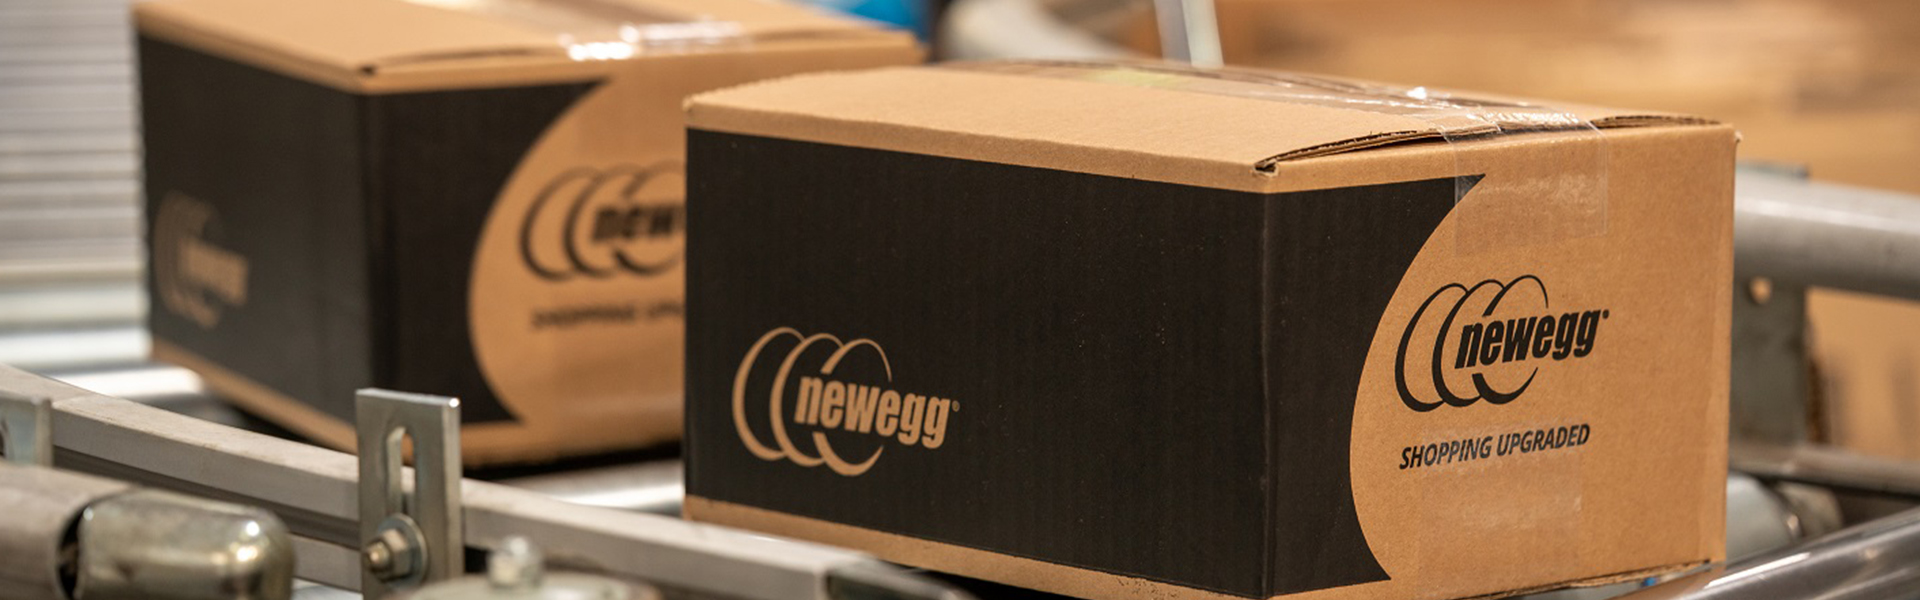 Newegg Expands North American Presence with New Distribution Facilities in Georgia and California